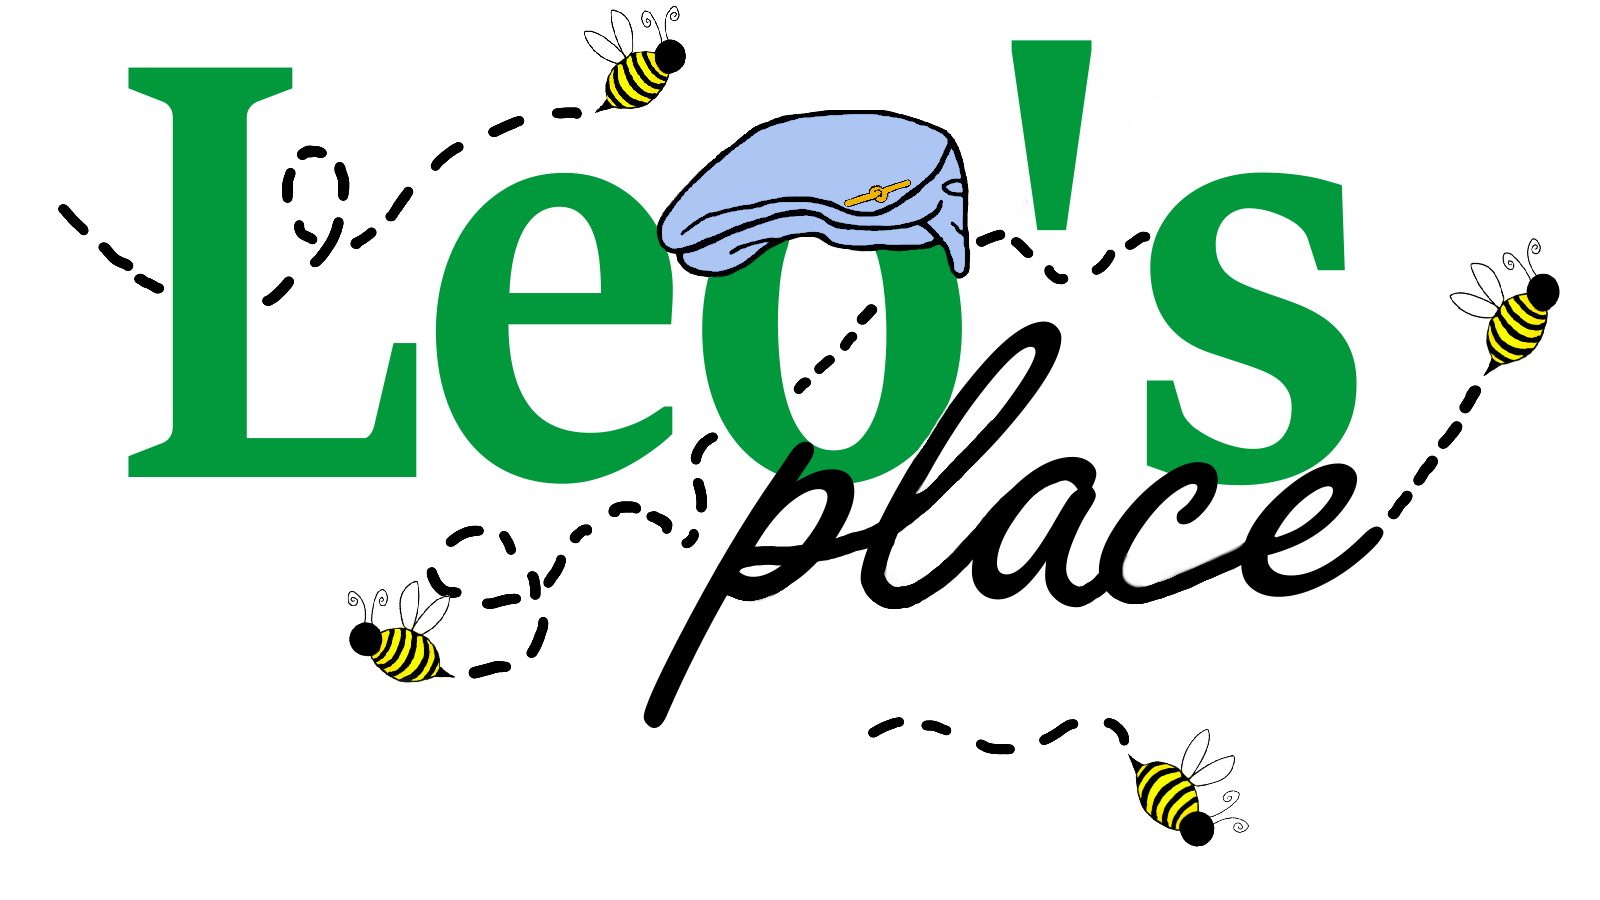 Leo’s Place Community Meals every Wednesday (lunch 11:45 a.m. – 12:30 p.m. coffee time 9 a.m. - 2 p.m.). Come join us and share in the spirit of community.